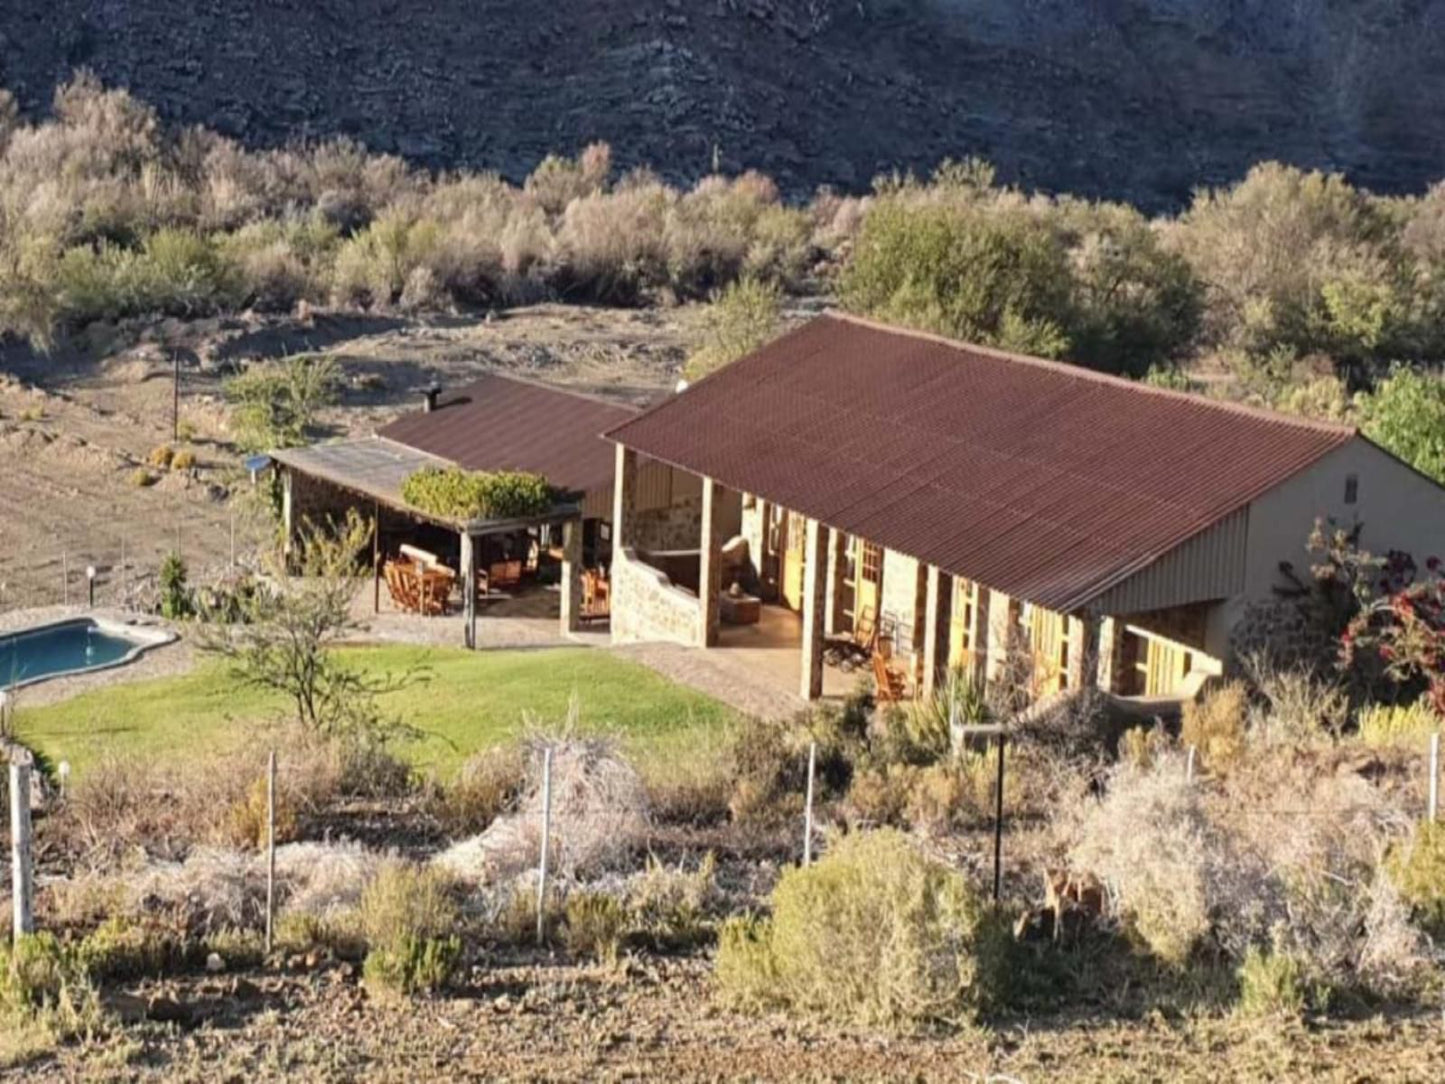 Wagendrift Lodge Laingsburg Western Cape South Africa Cabin, Building, Architecture